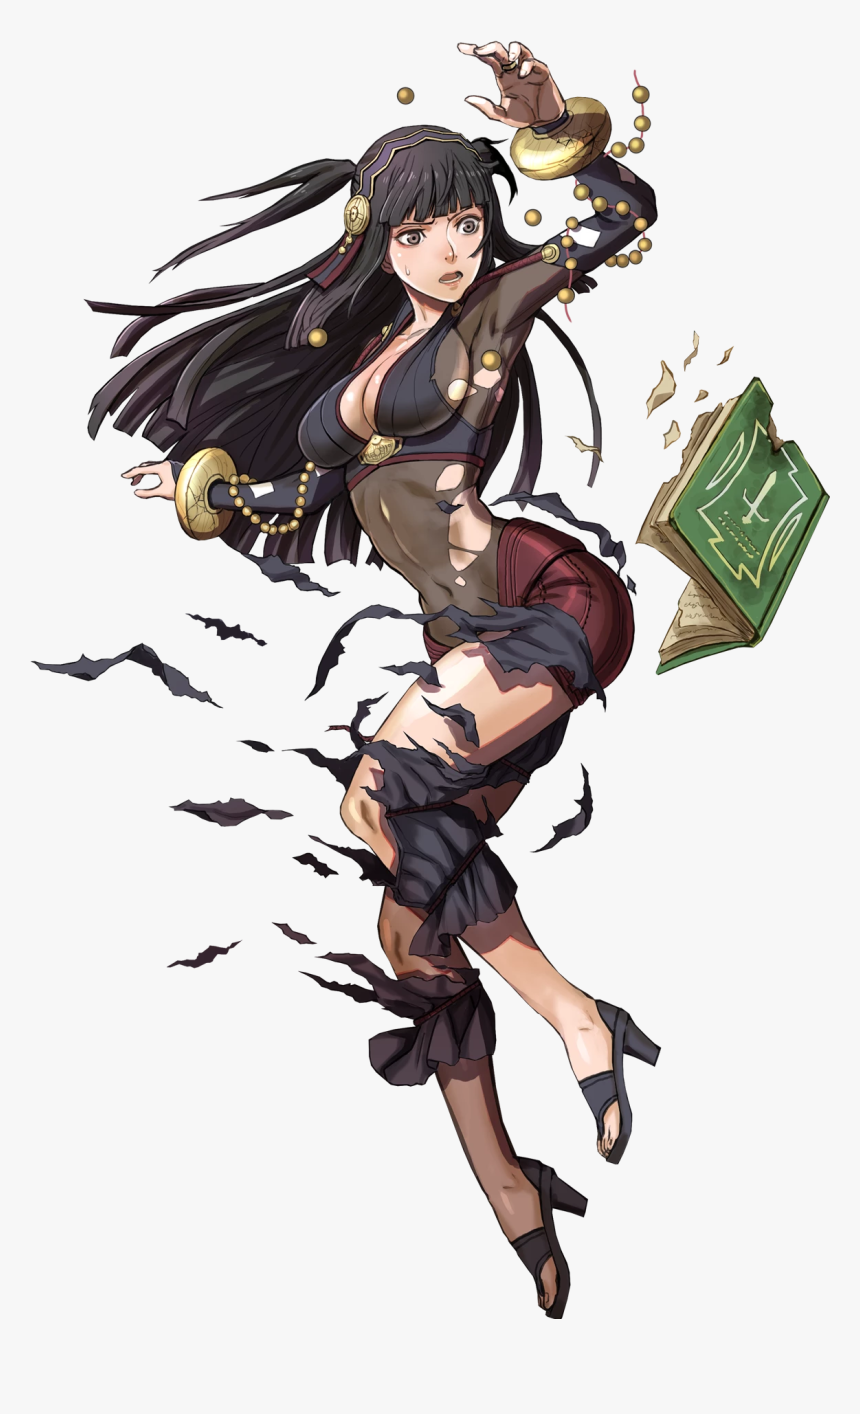 Todays Thot Character Of The Day Is - Fire Emblem Heroes Rhajat